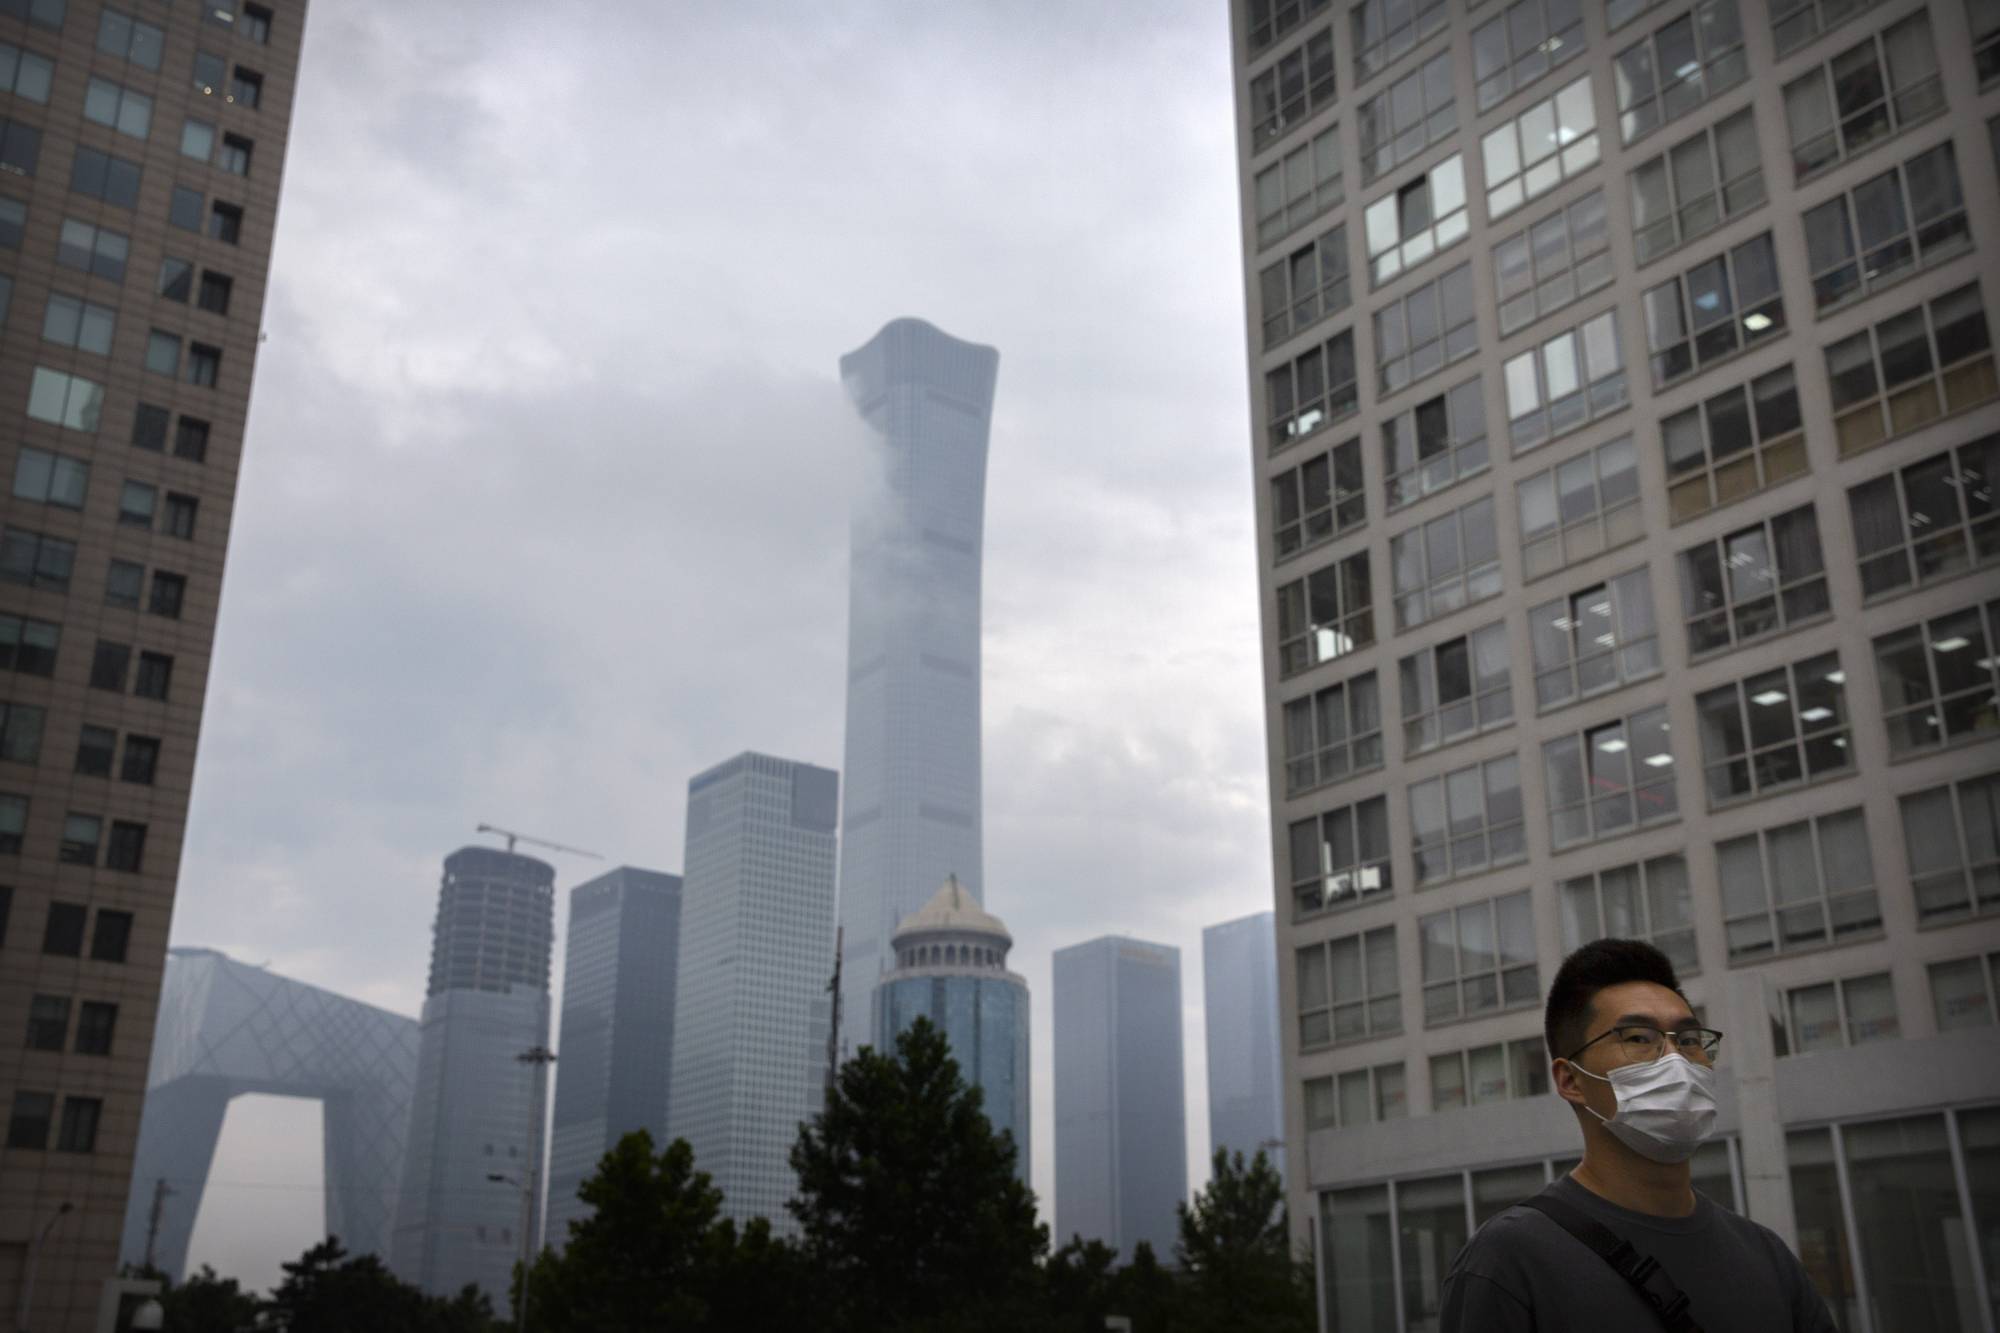 The central business district in Beijing. According to an estimate, Shanghai saw 27,000 deaths from Jan. 1 due to smog, more than the 22,000 in Beijing. | AP